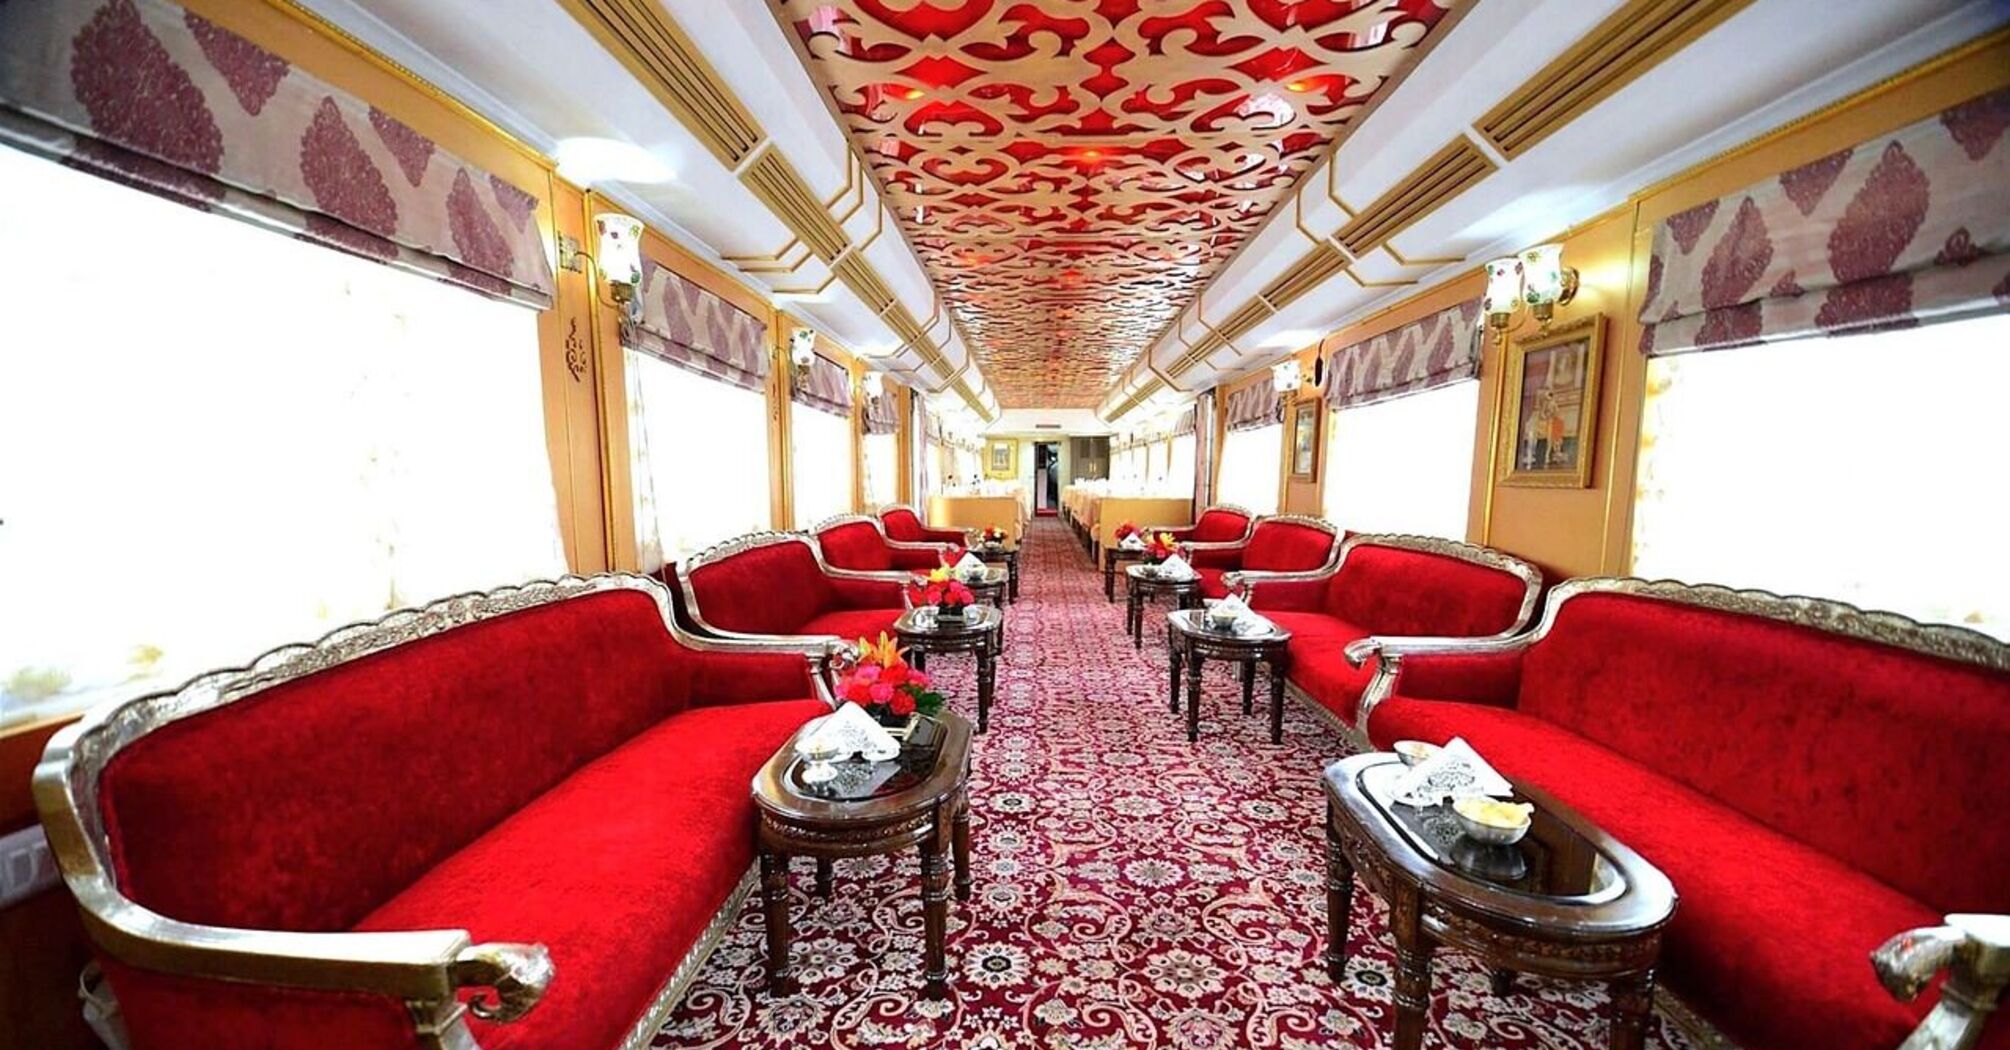 Visit the religious sites of the "Palace on Wheels"